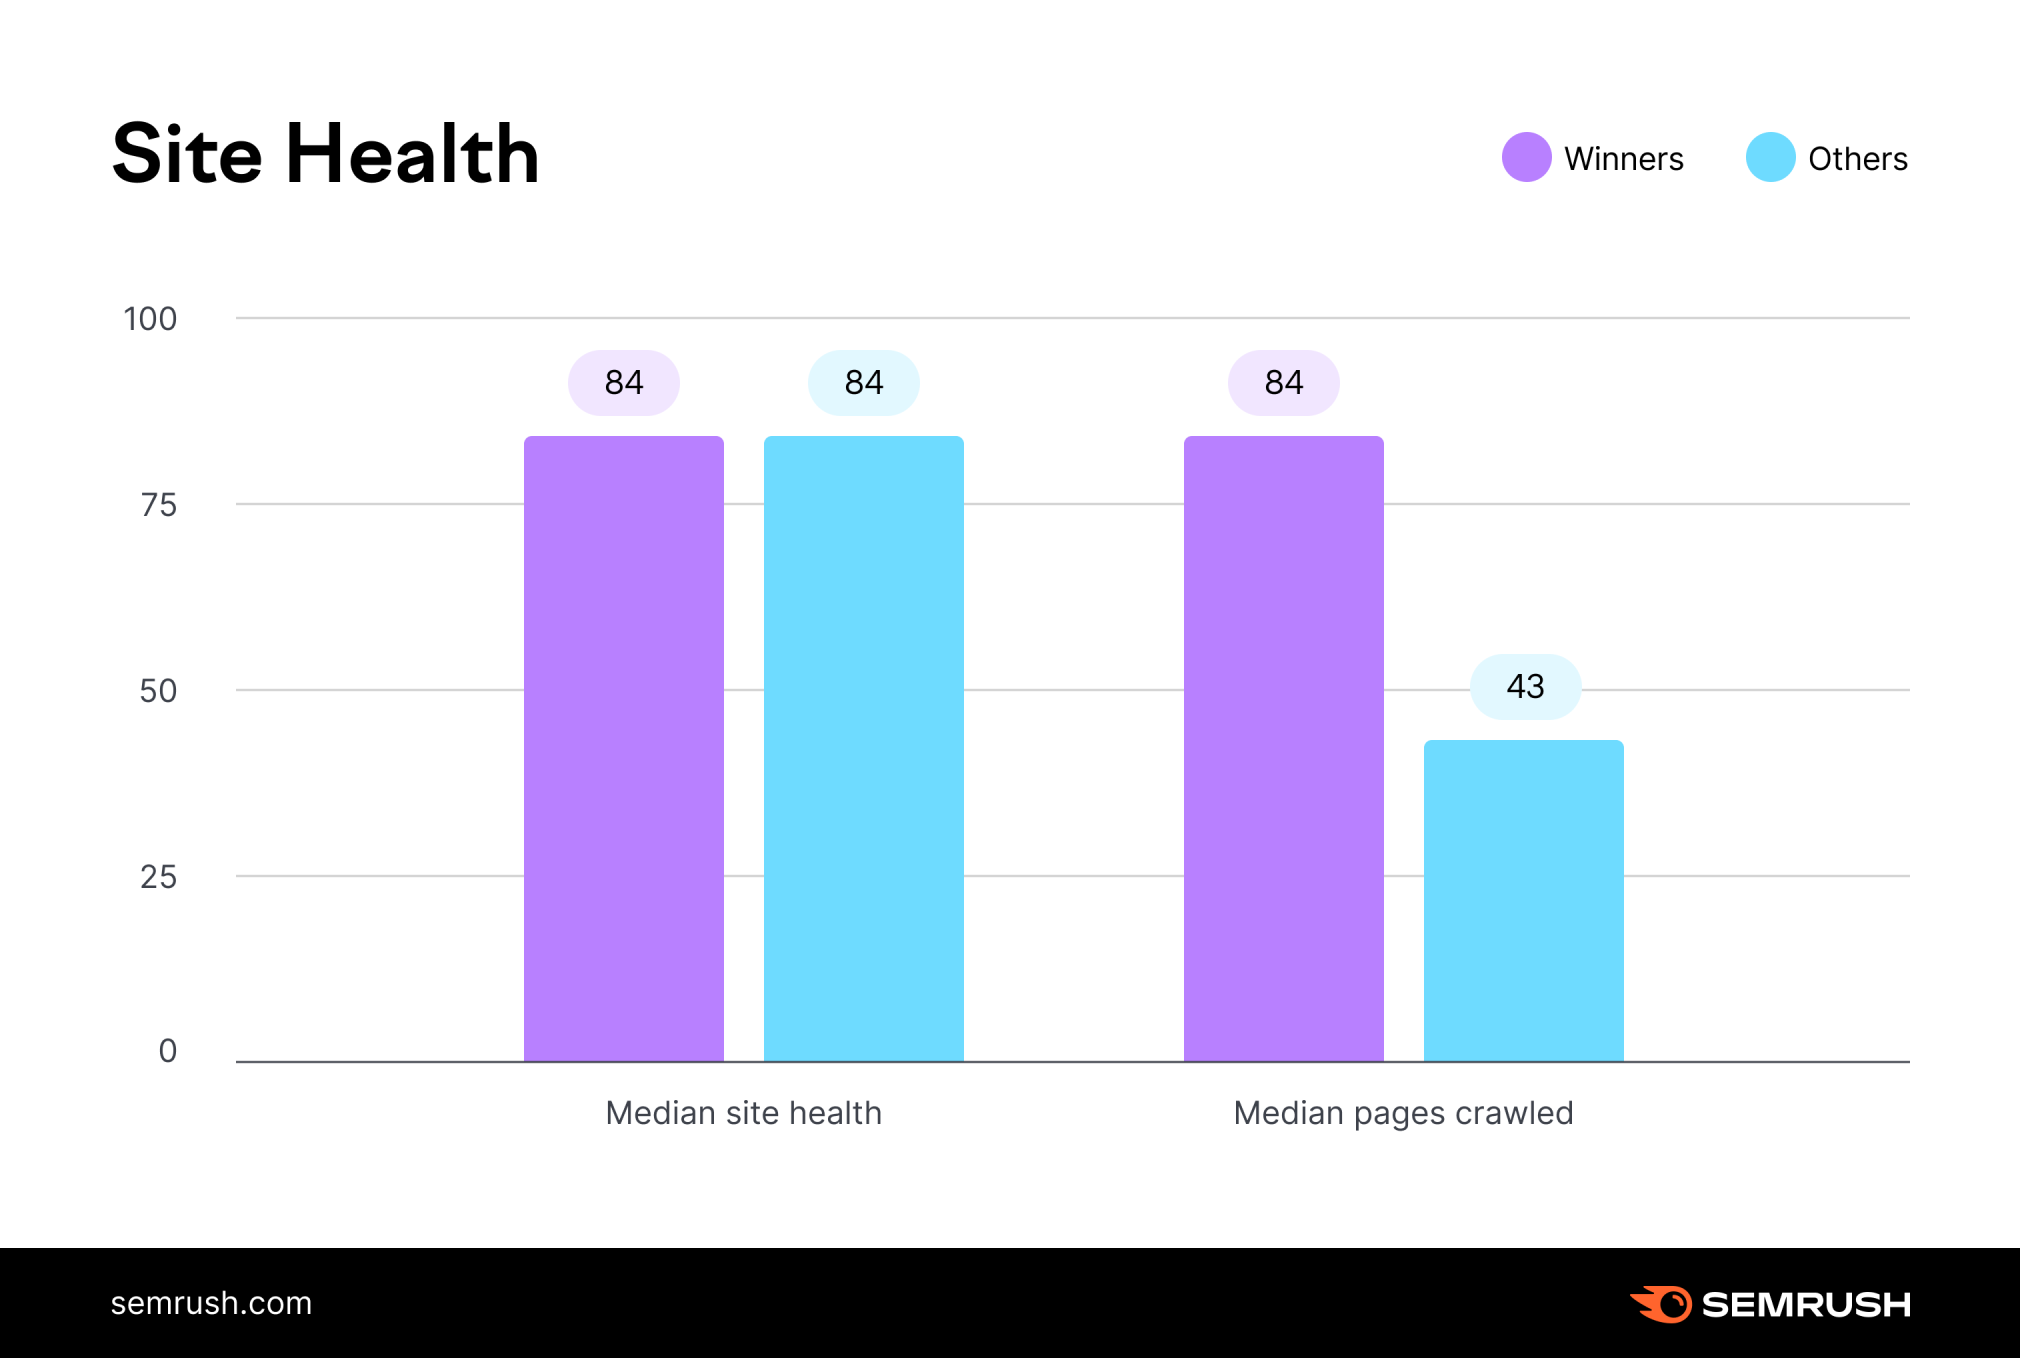 This chart from Semrush compares the median site health and median pages crawled for two groups of domains.